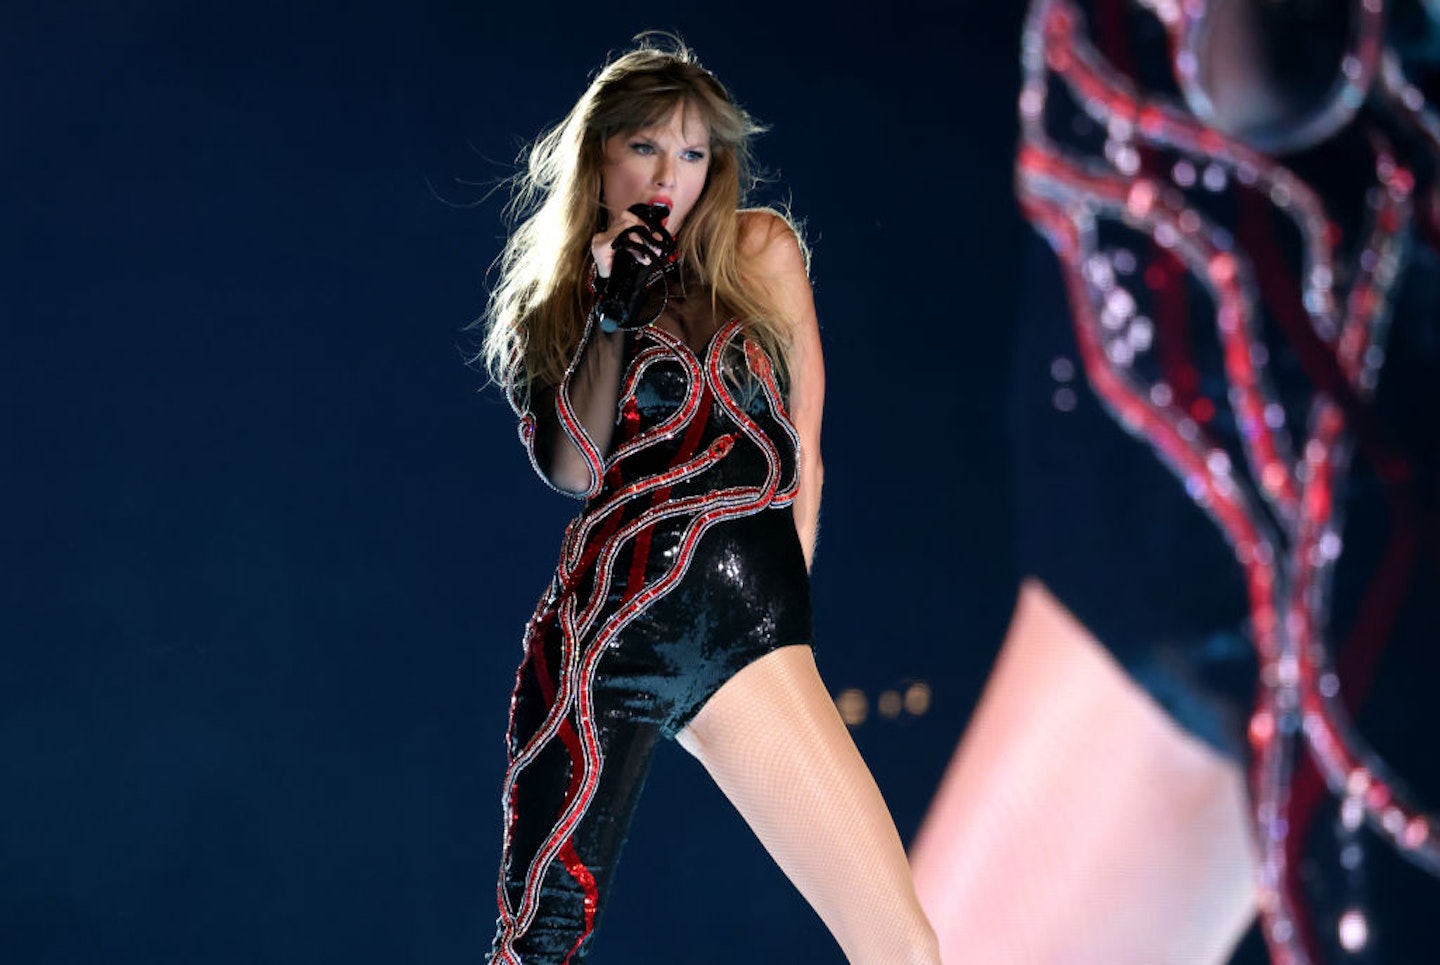 Every Look From Taylor Swift's 'The Eras' Tour Wardrobe So Far